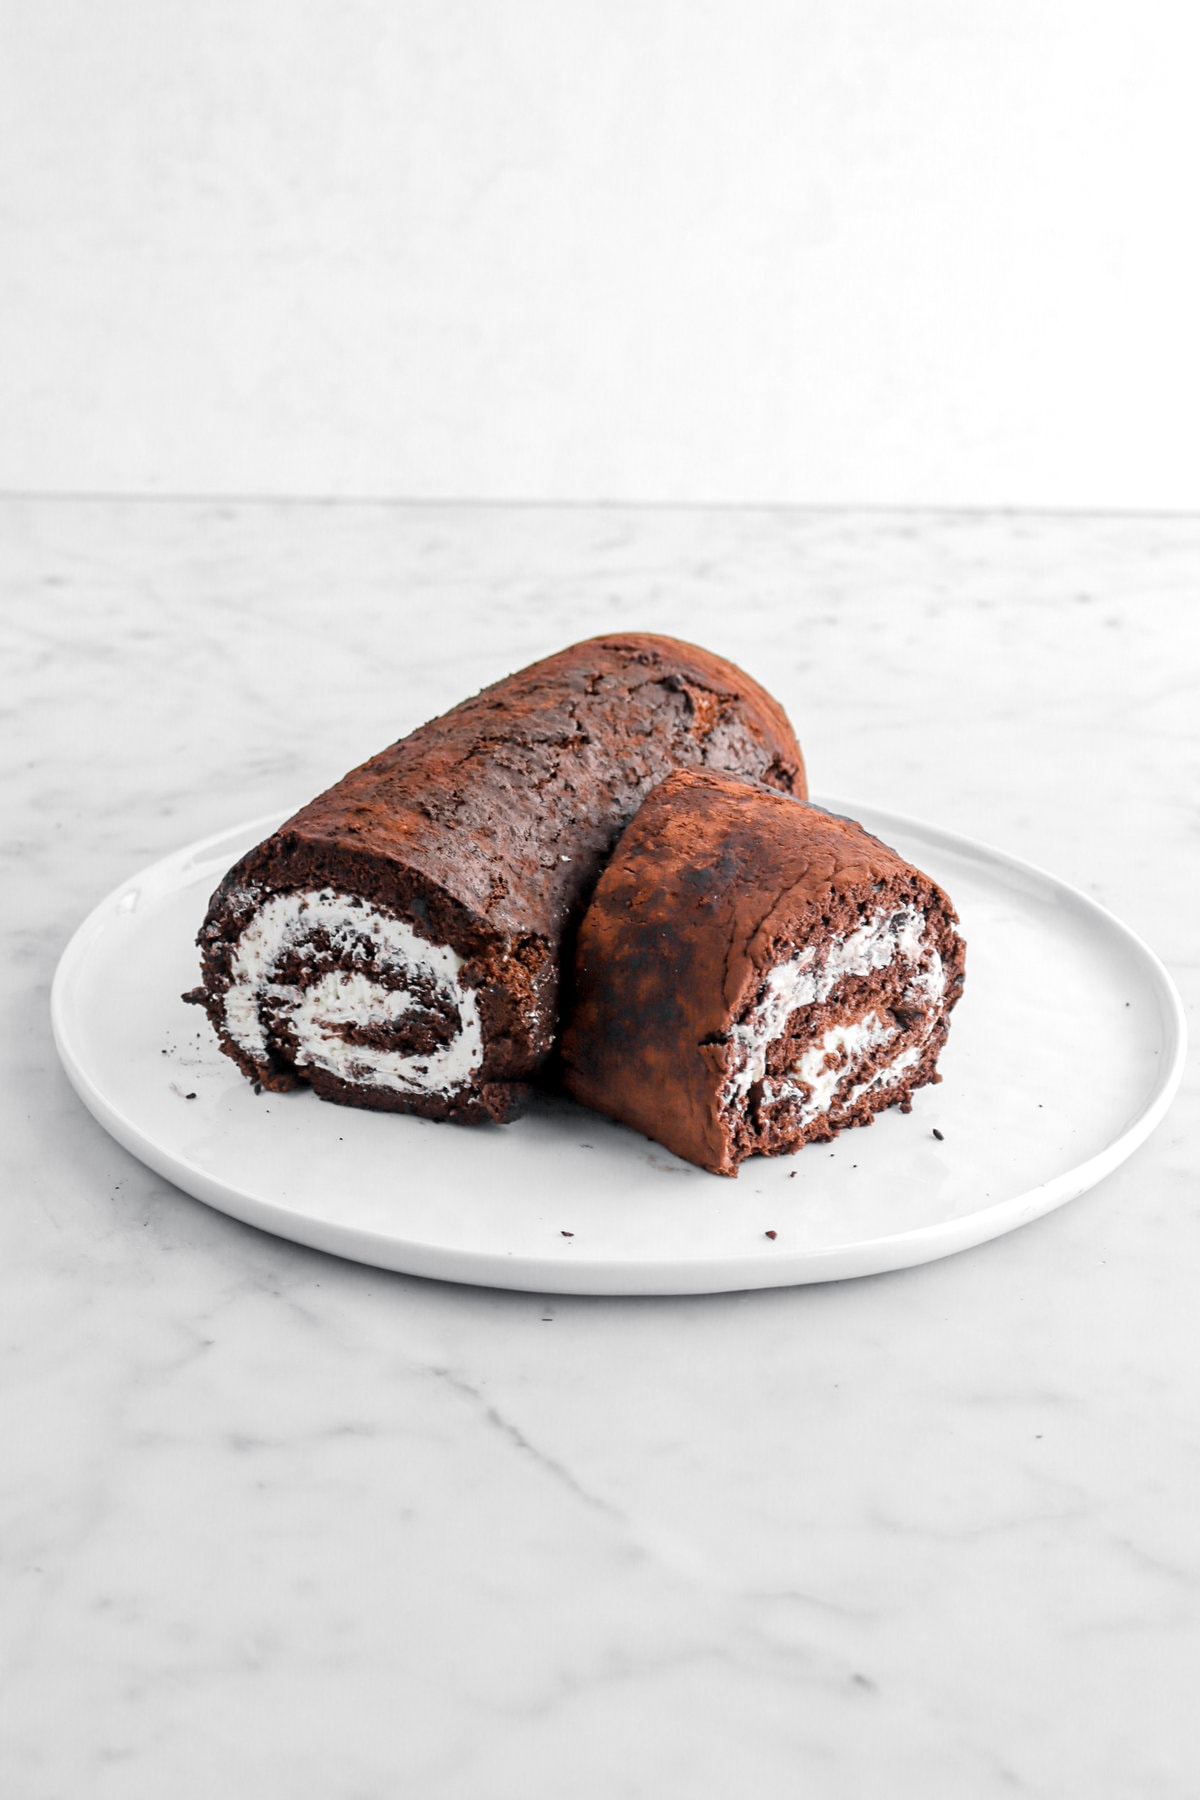 chocolate cake roll on white plate with two pieces placed to resemble a log.